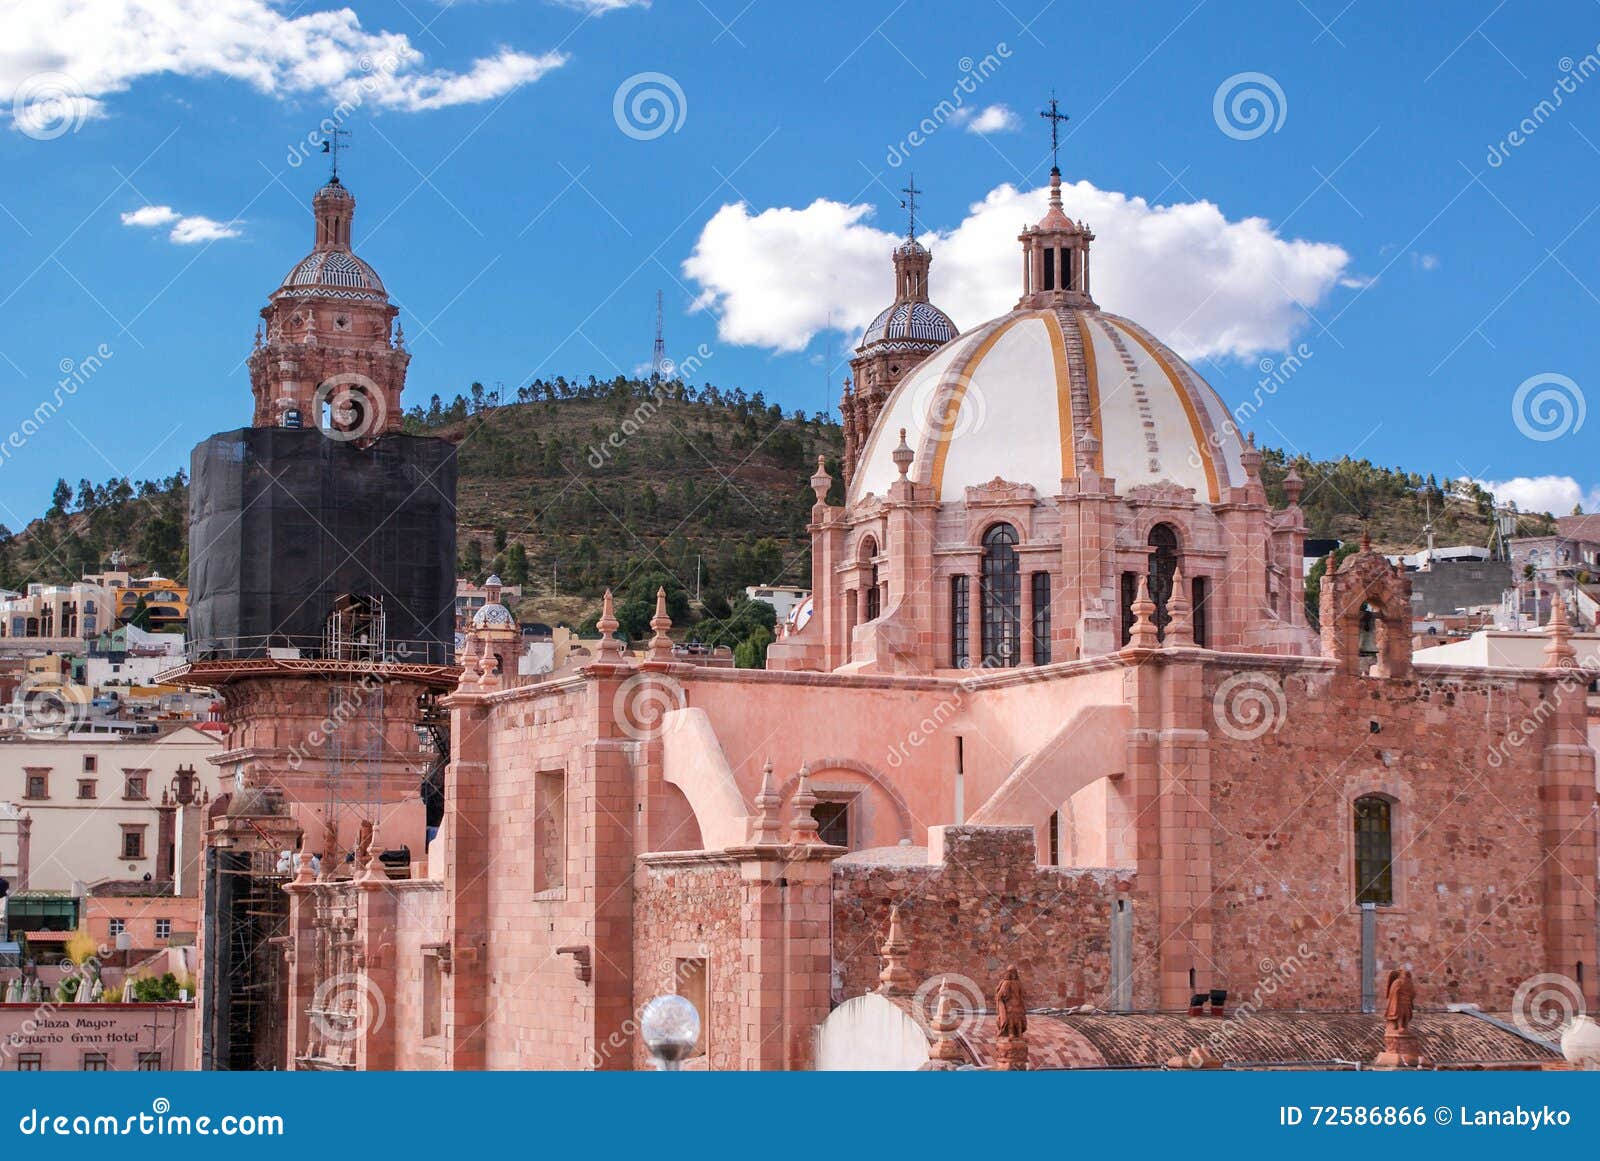 the cathedral of our lady of the assumption of zacatecas, mexico